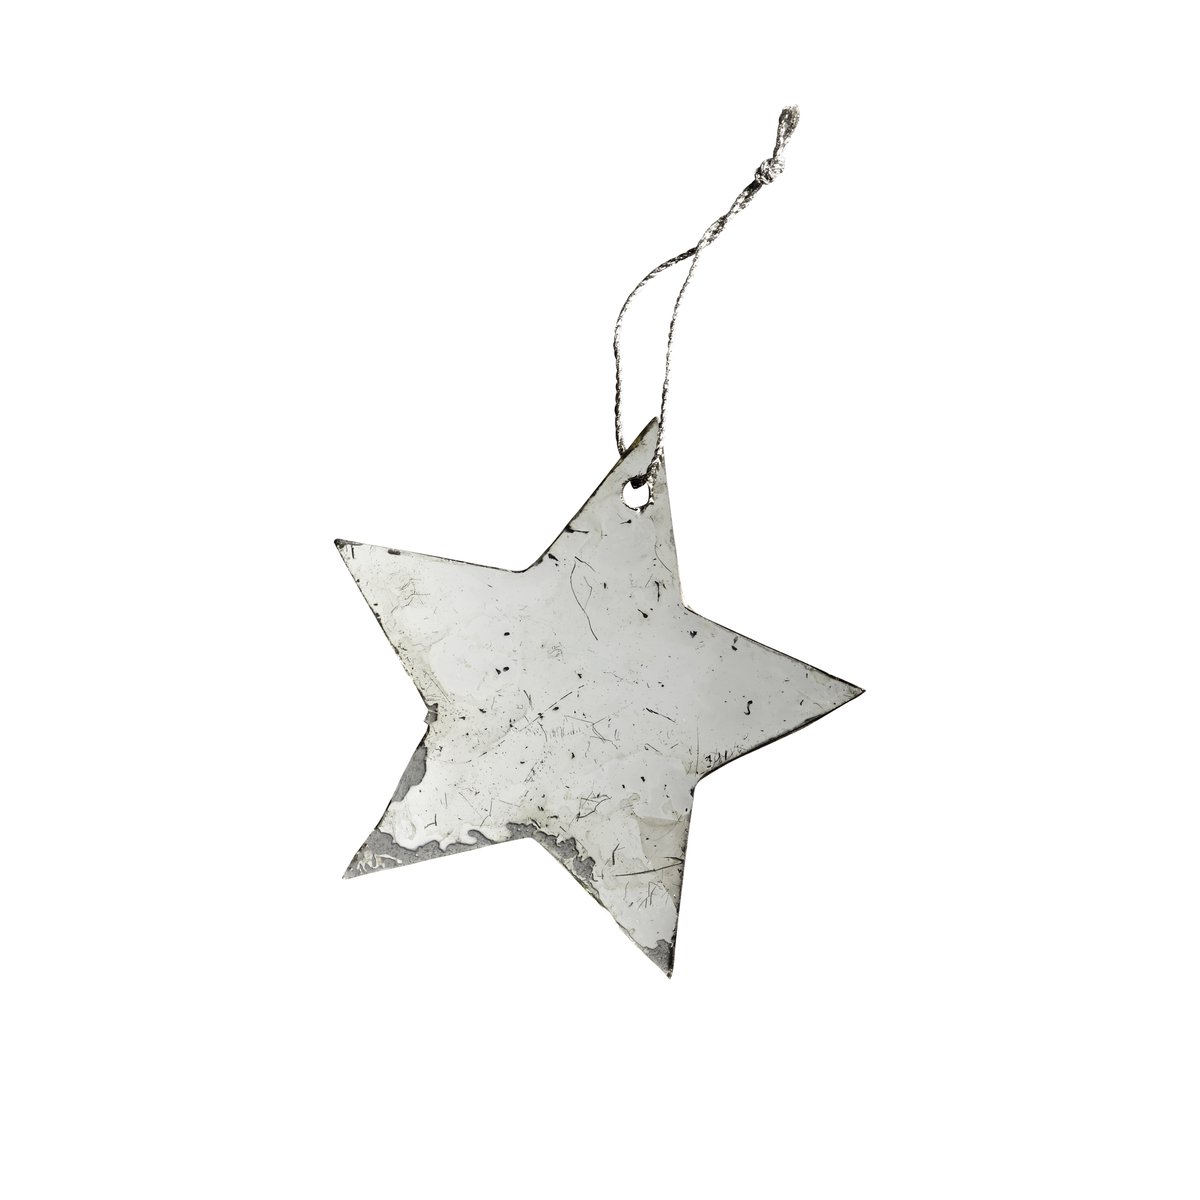 Small mirror star for hanging